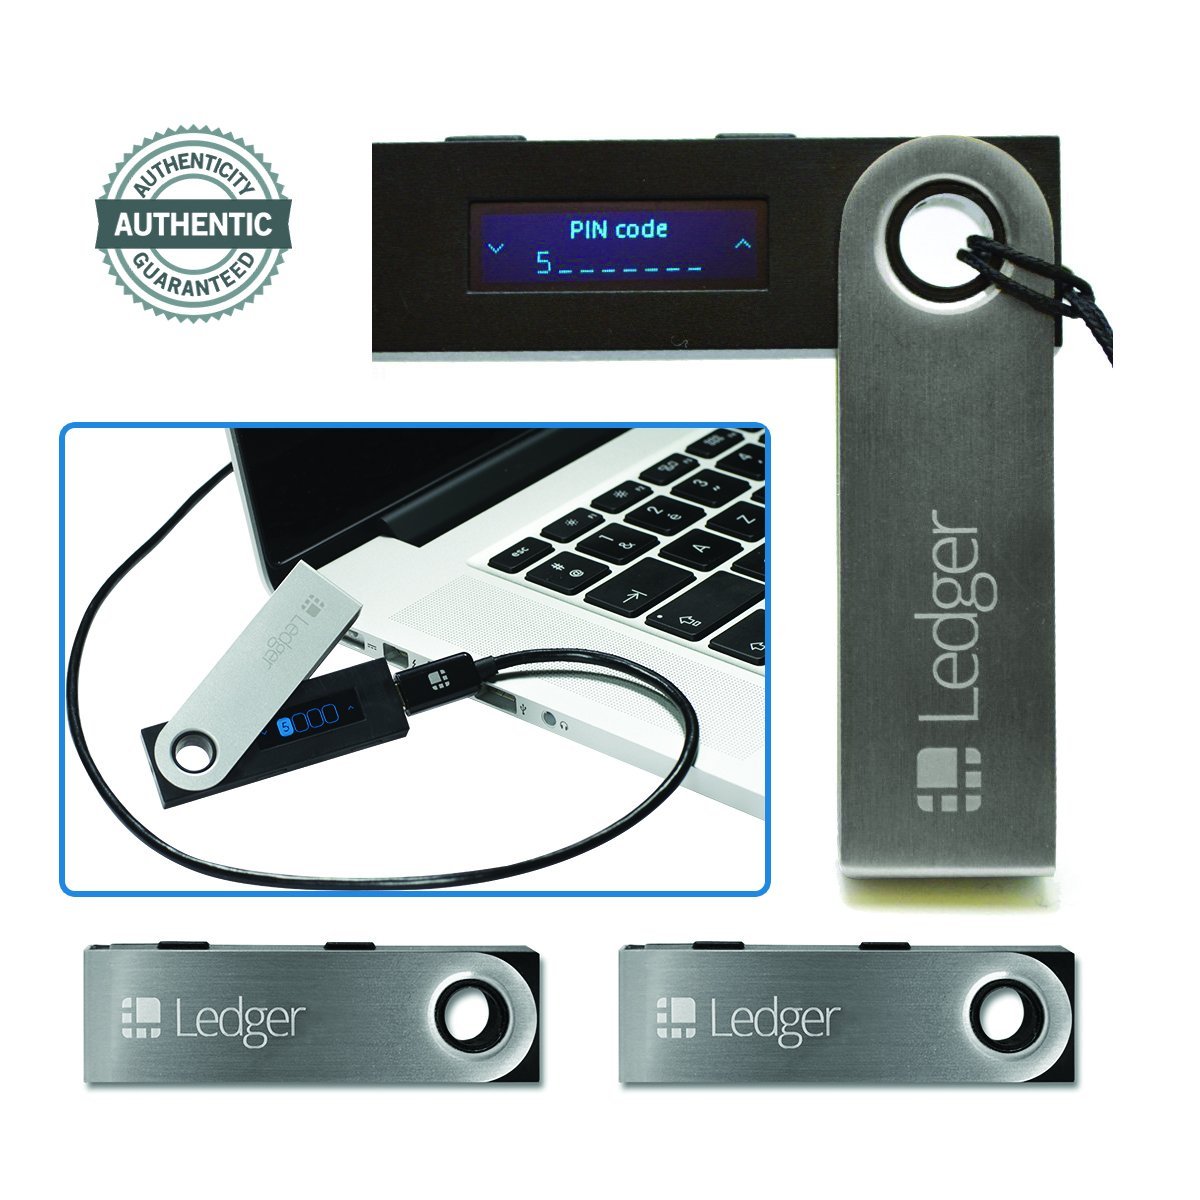 ledger nano s cryptocurrency hardware wallet 2 pack